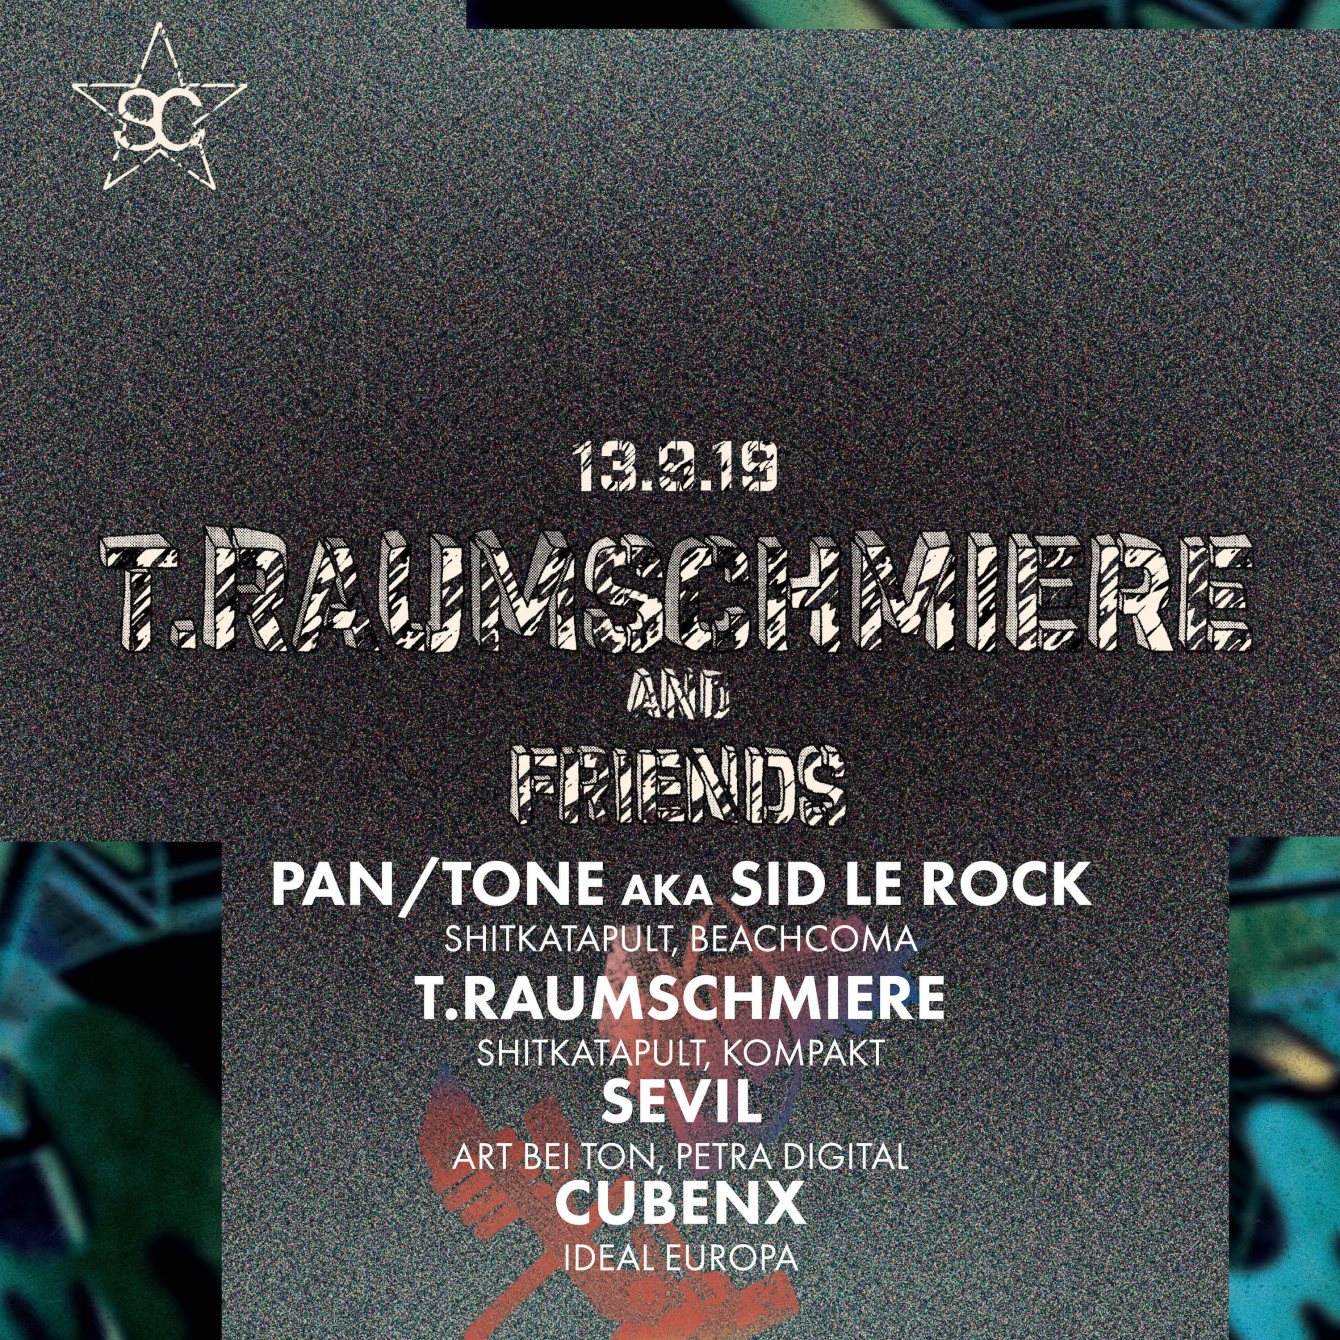 T.Raumschmiere & Friends with Pan/Tone aka Sid Le Rock & More - フライヤー裏